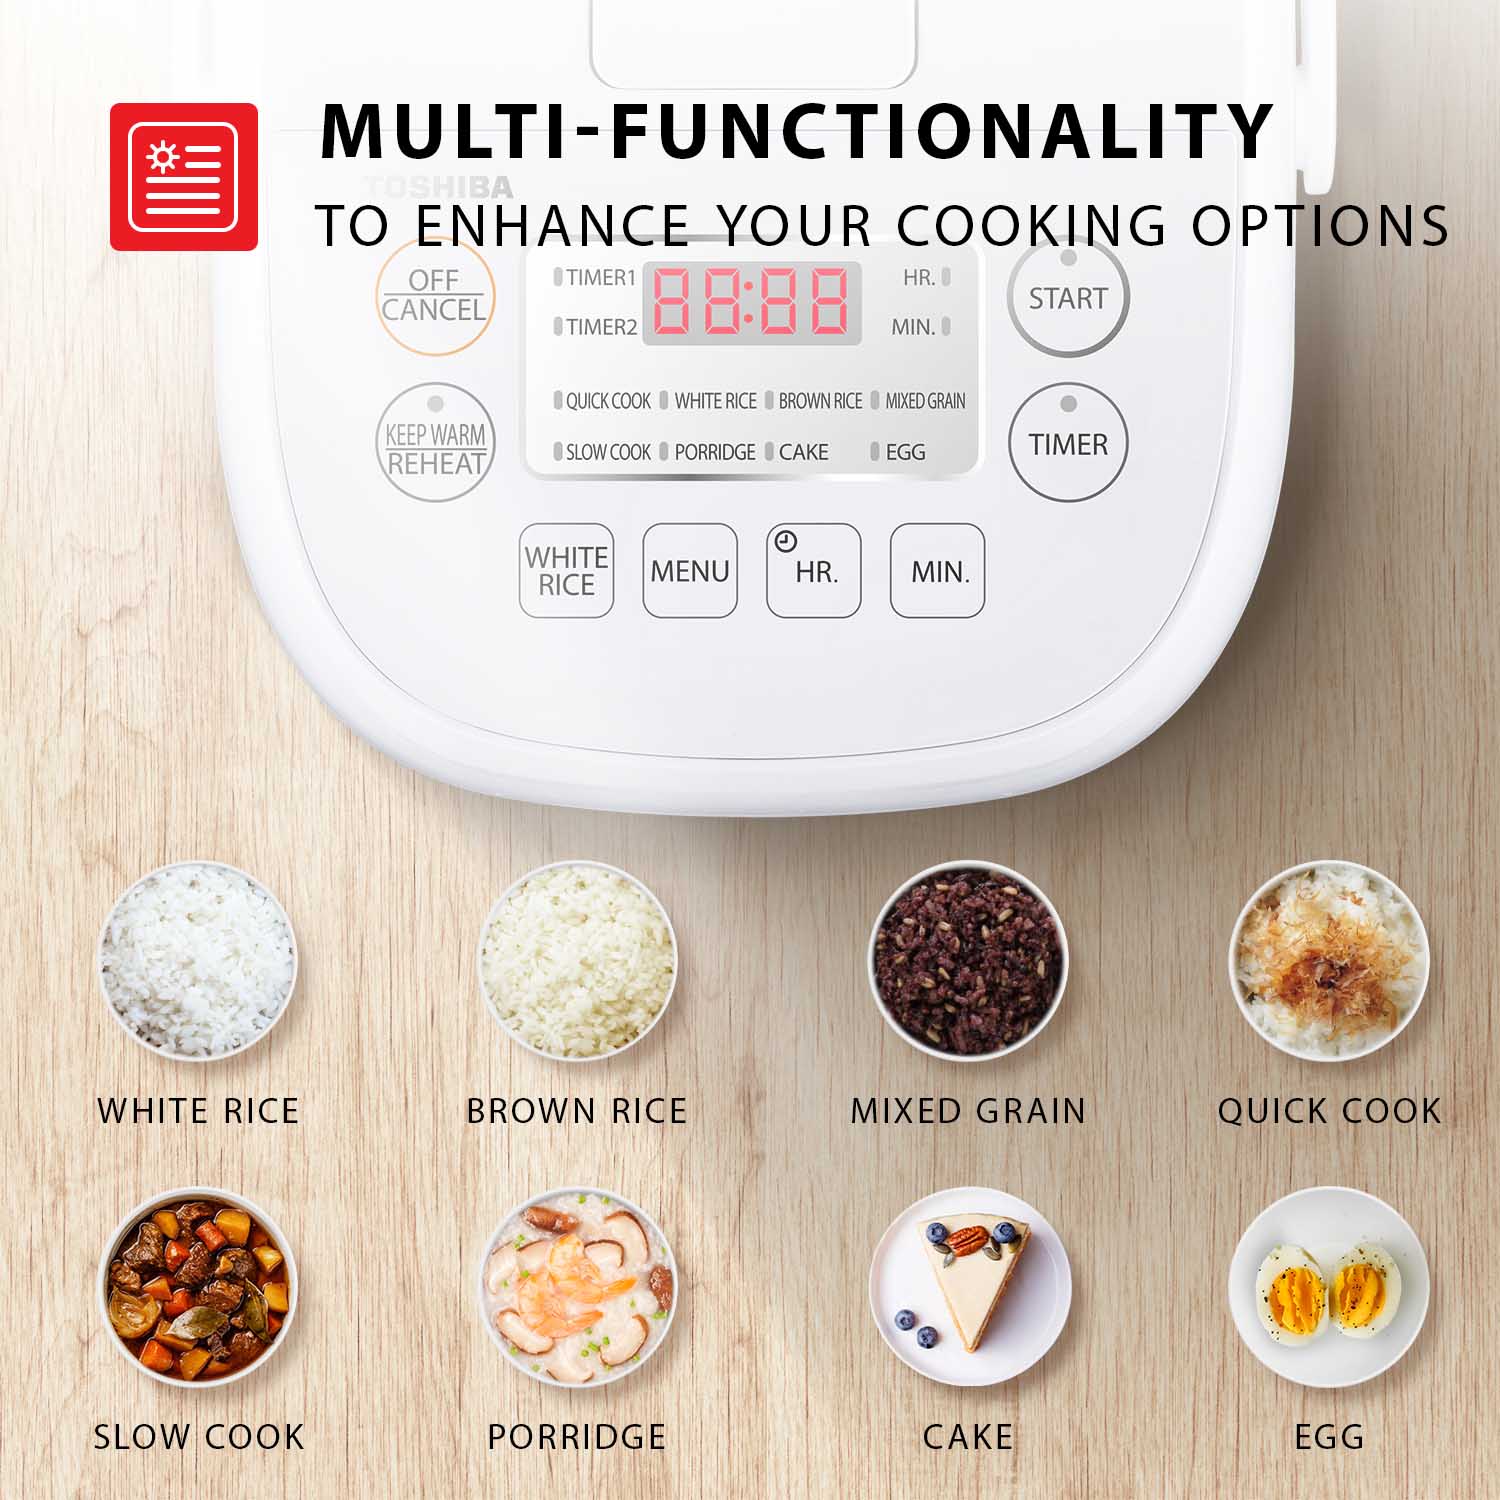  Toshiba Rice Cooker Small 3 Cup Uncooked – LCD Display with 8  Cooking Functions, Fuzzy Logic Technology, 24-Hr Delay Timer and Auto Keep  Warm, Non-Stick Inner Pot, White: Home & Kitchen